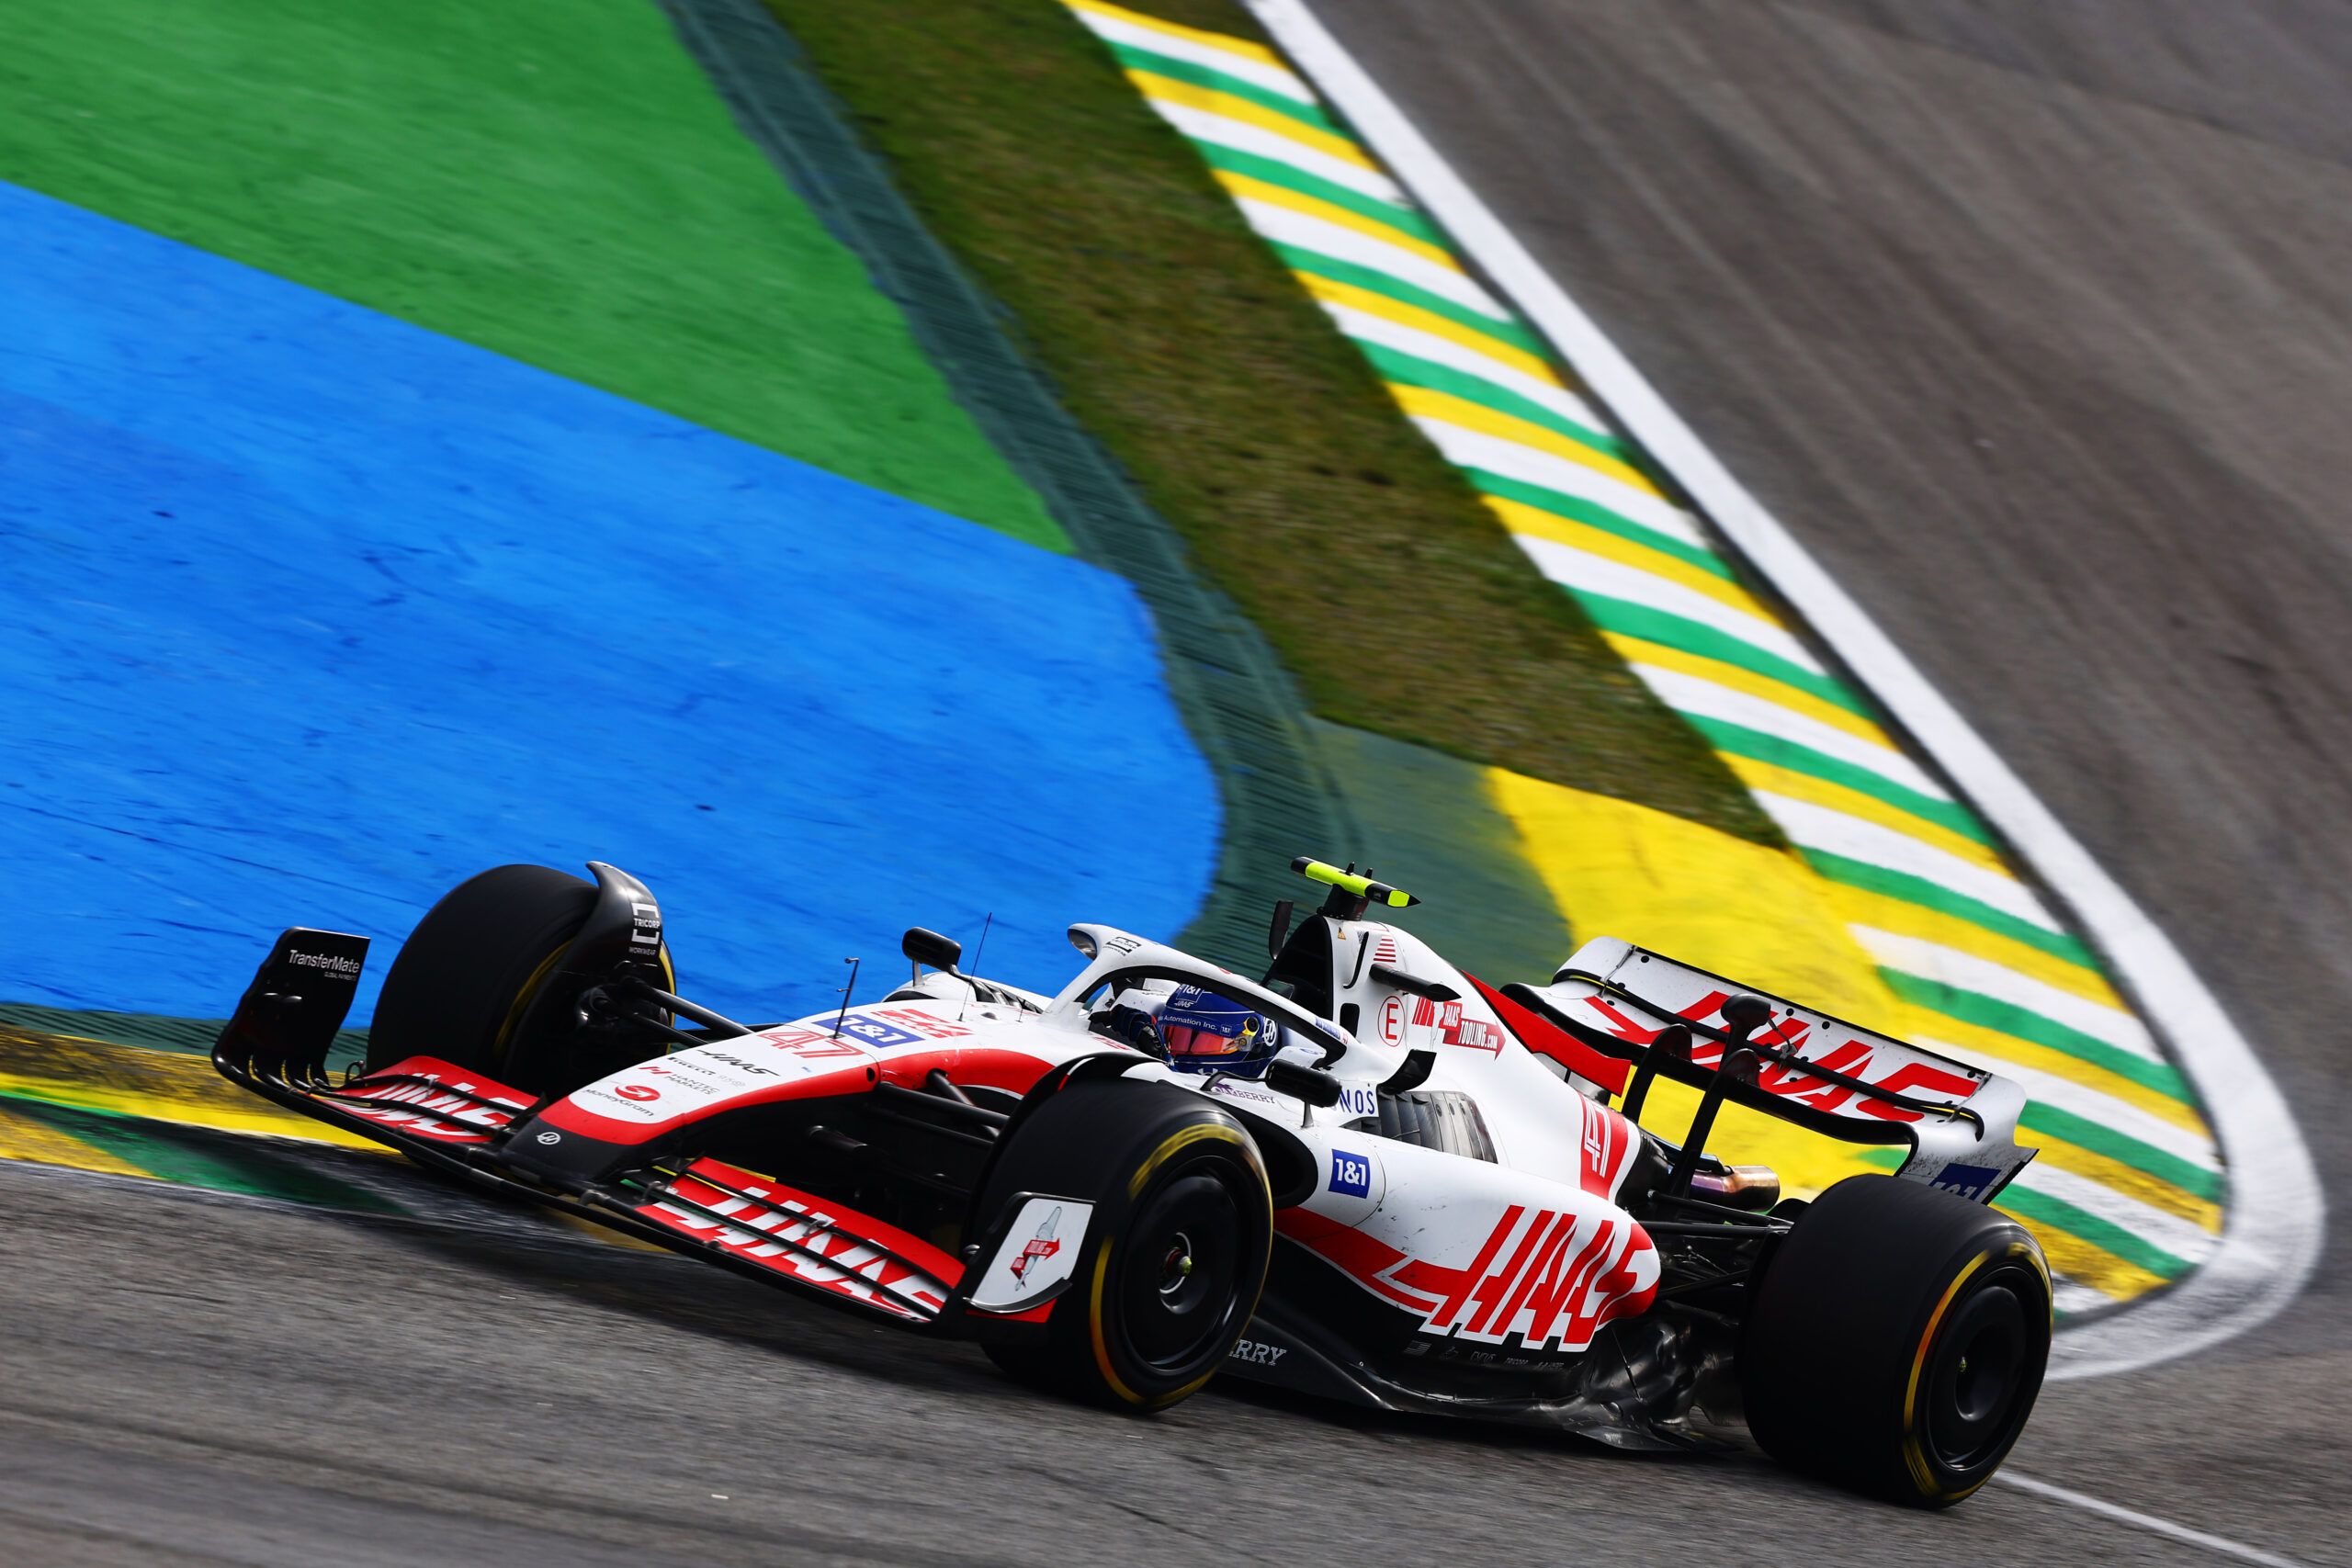 Nico Hulkenberg replaces Mick Schumacher at Haas for 2023